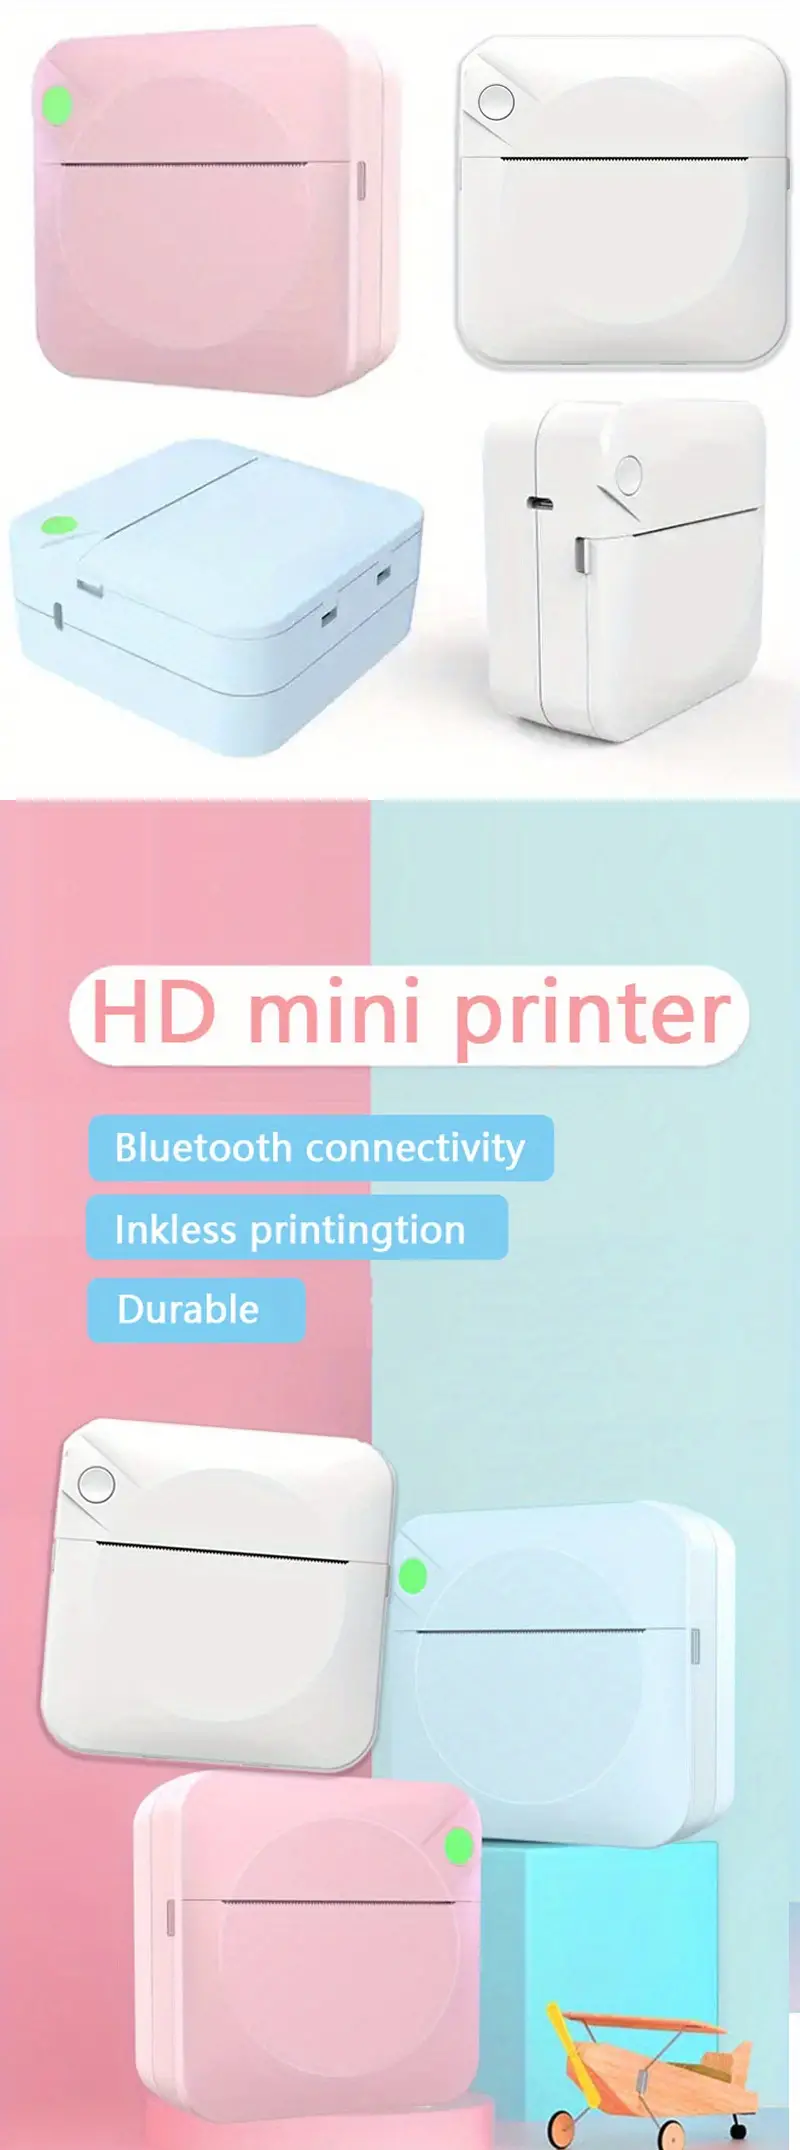 factory direct sale student mini printer staff bt mobile office heat sensitive printer print file picture label connected to mobile phone android powder blue white ink free pocket minicomputer details 0